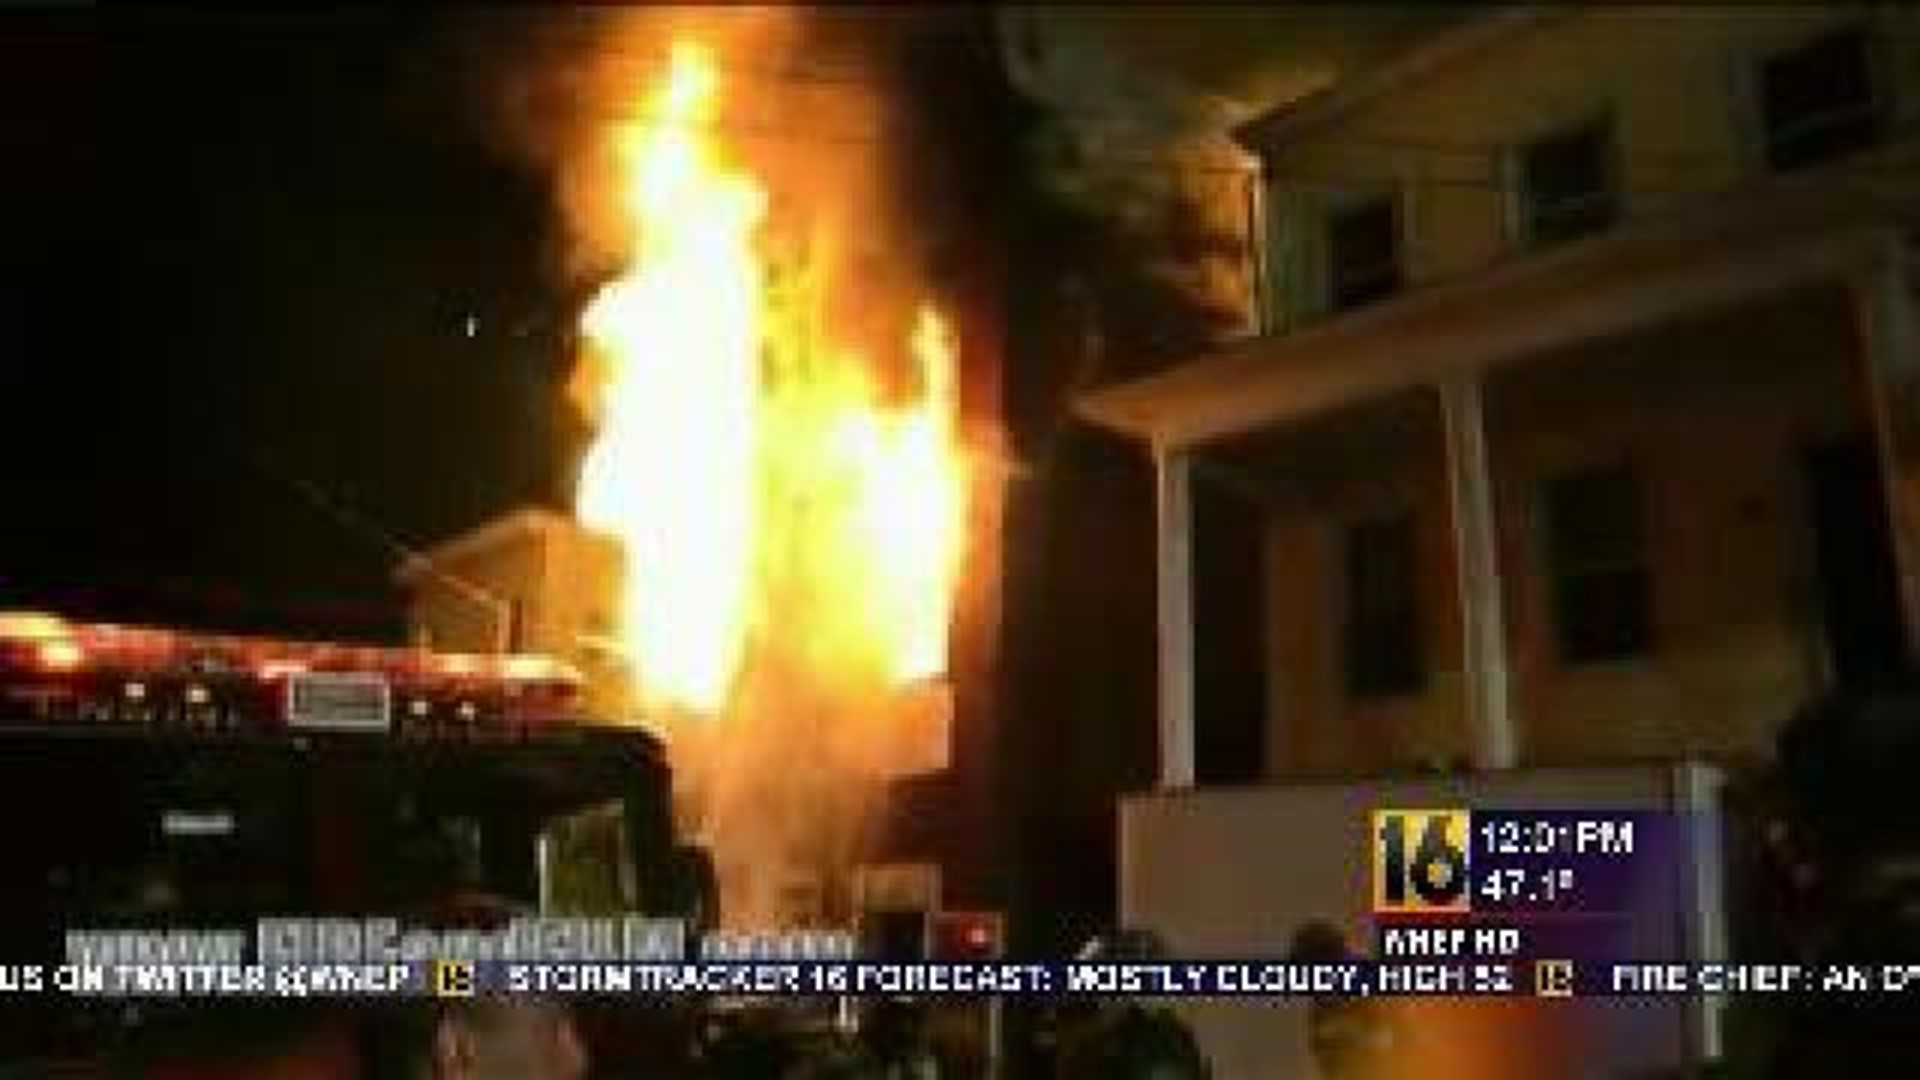 Pottsville Tragedy: Four Children, Two Adults Killed In Fire